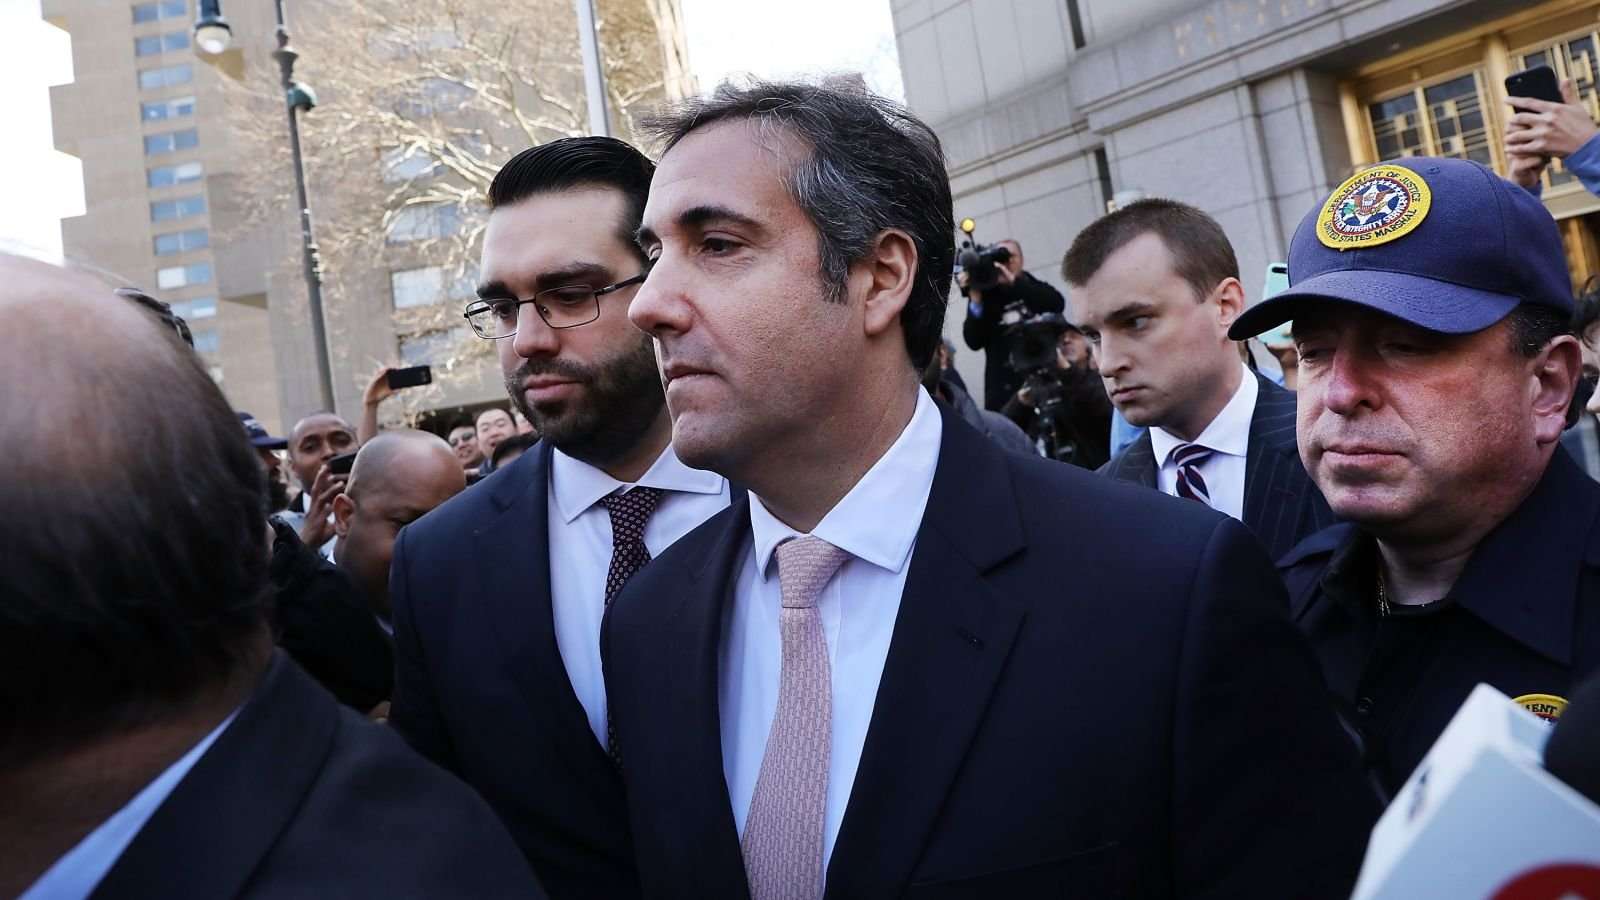 image for AT&T's Estimated Payment to Trump's Lawyer Rises to $600,000 as Investigations Ramp Up